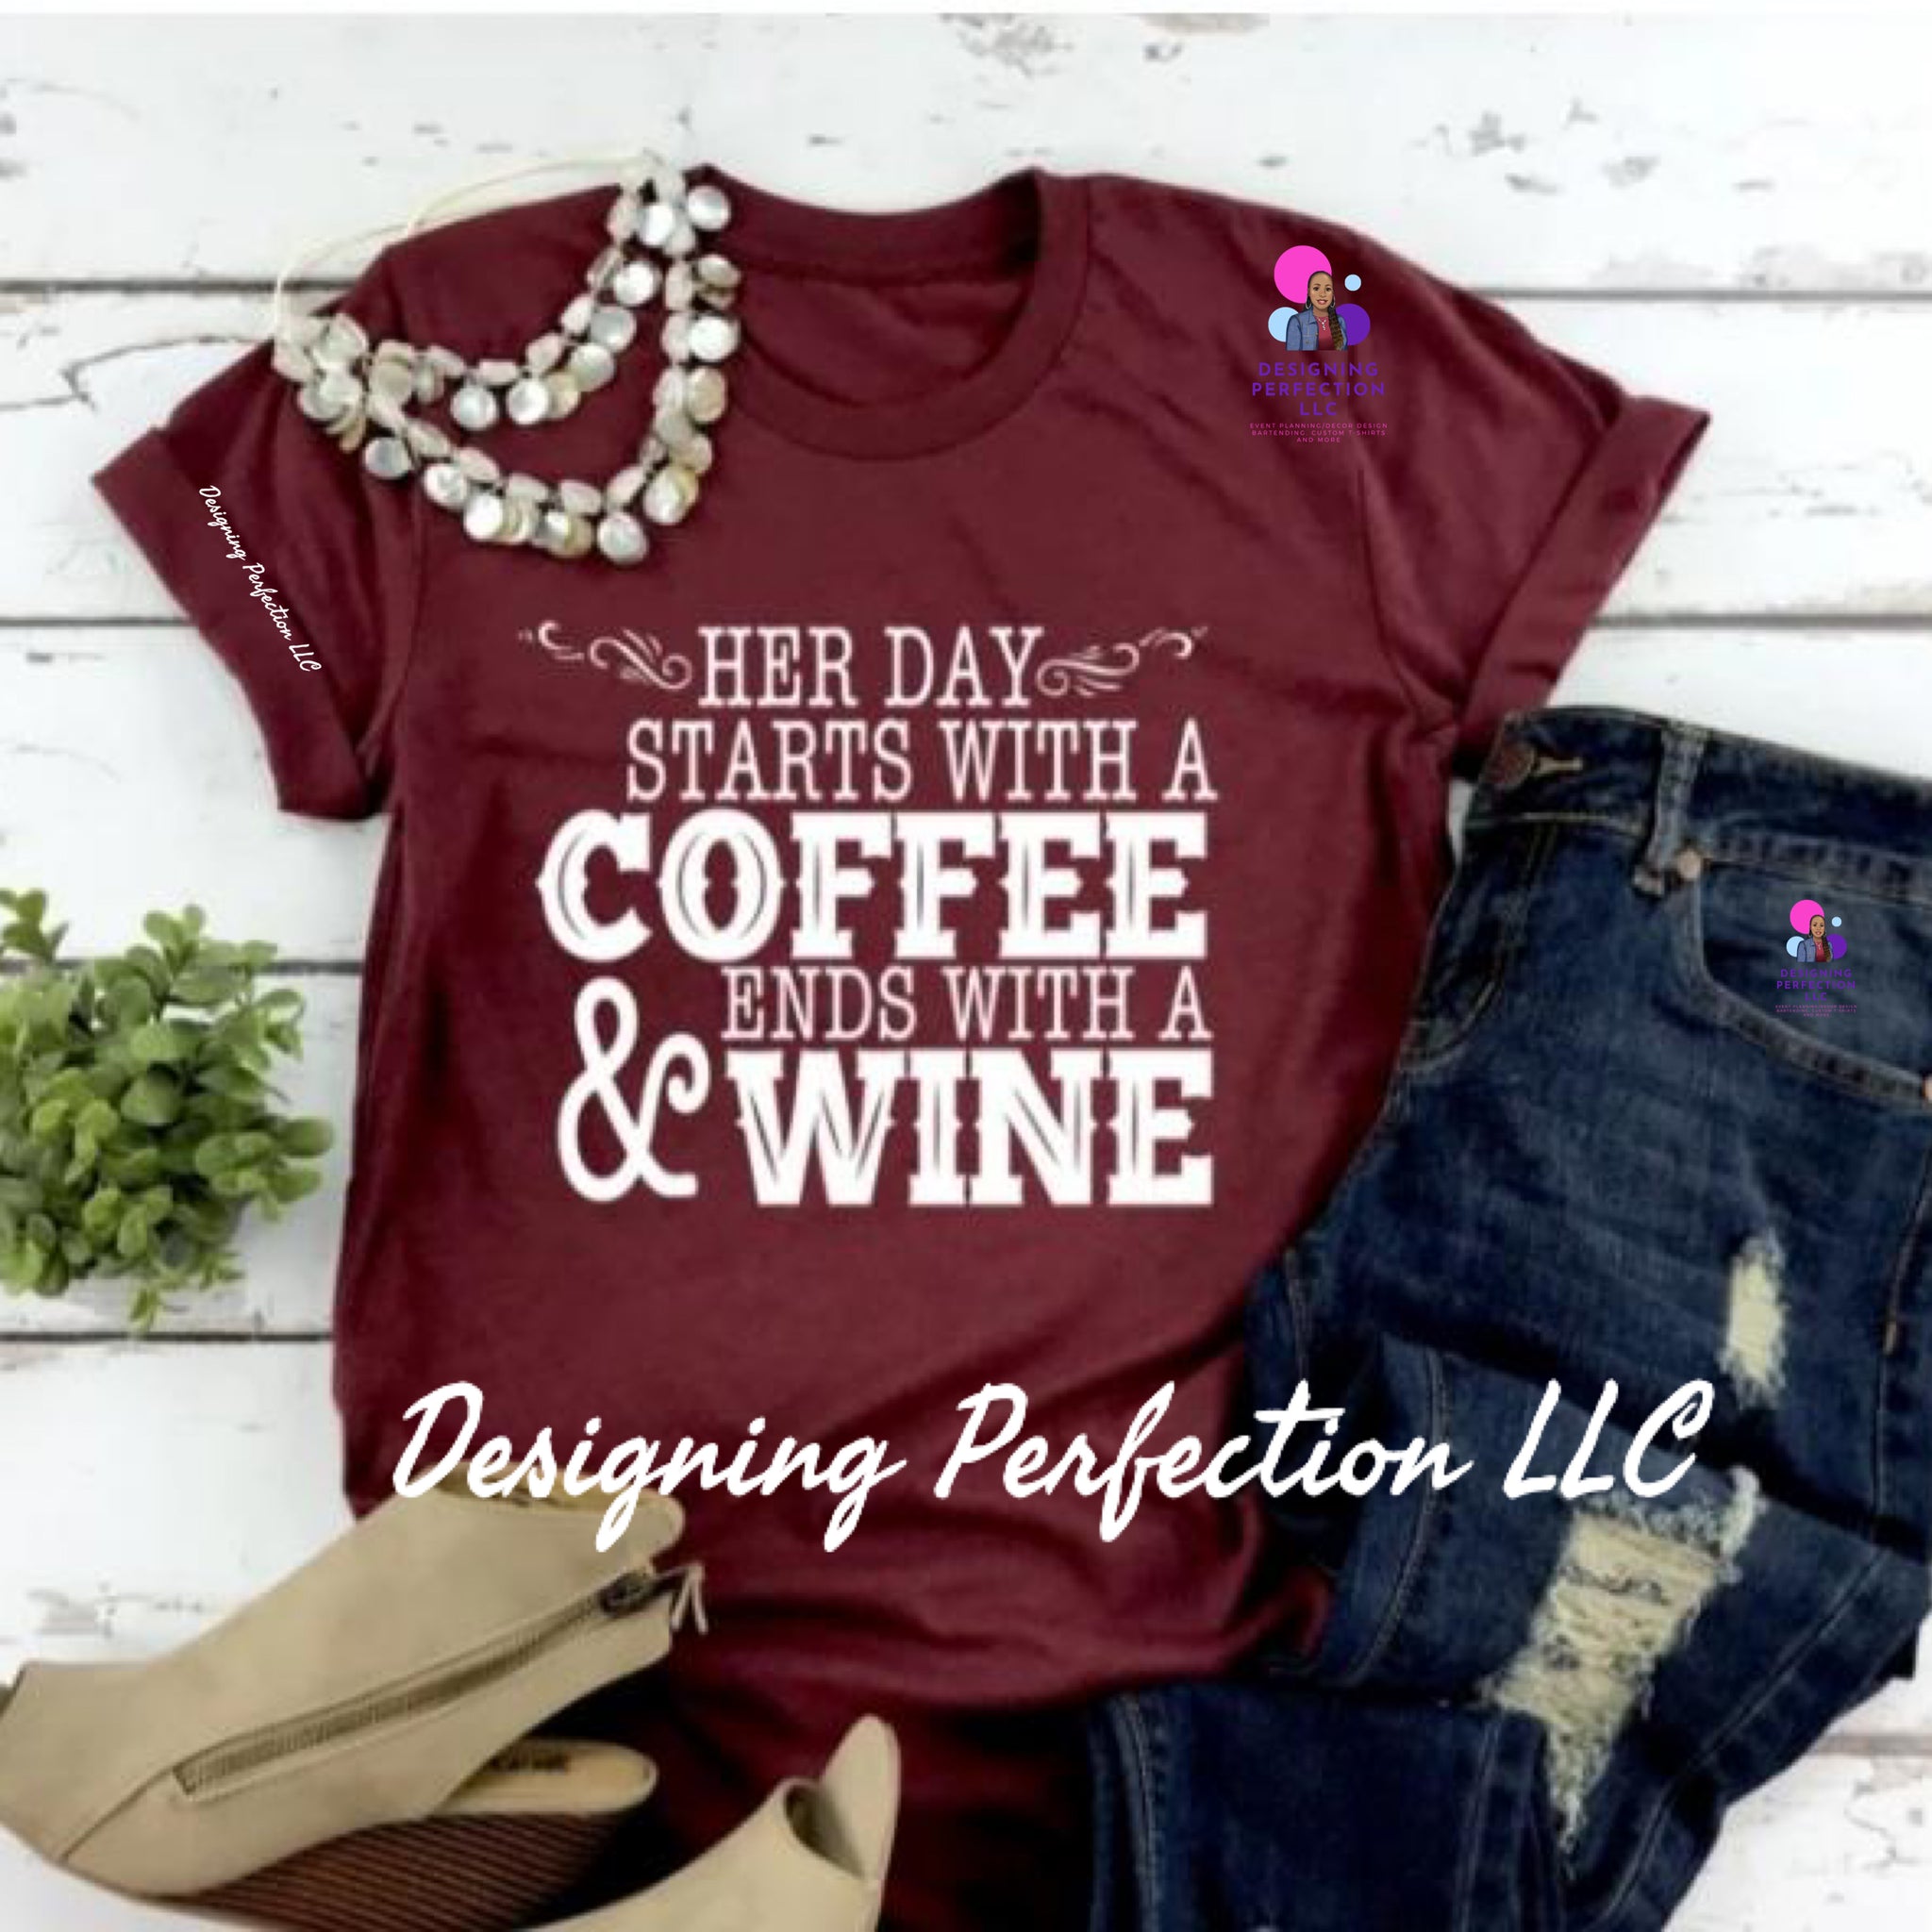 Her day starts with COFFEE and ends with Wine (9)